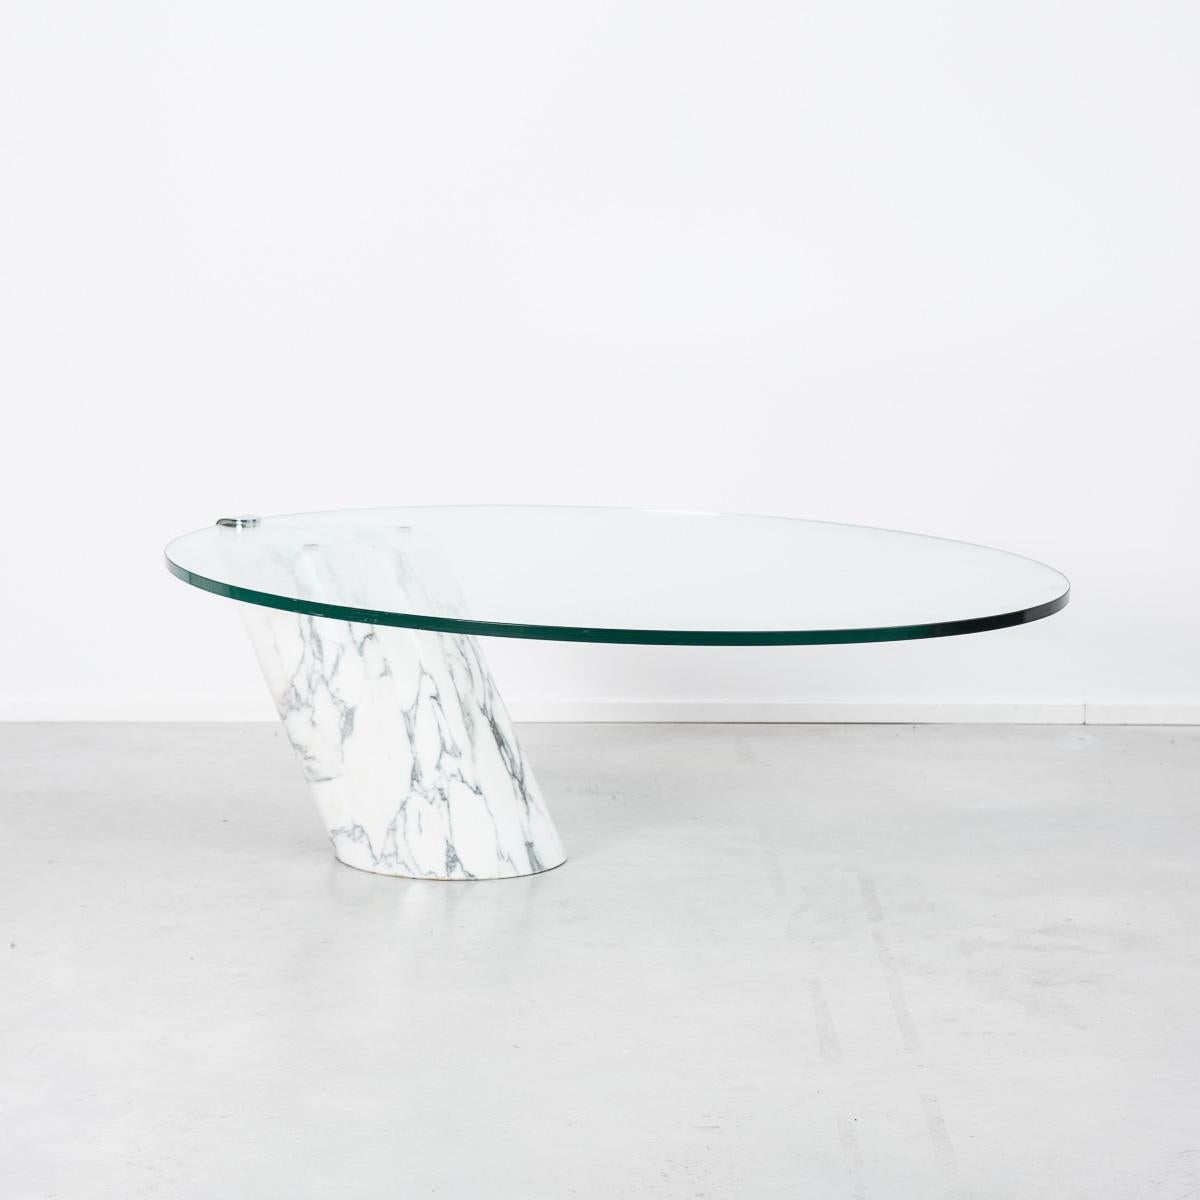 This remarkable cantilevered coffee table was designed by Frans Hero and Karl Odermatt for Swiss company Ronald Schmitt. The thick glass top is fixed to the marble base by a single metal bracket giving it a gravity defying effect. As you can imagine